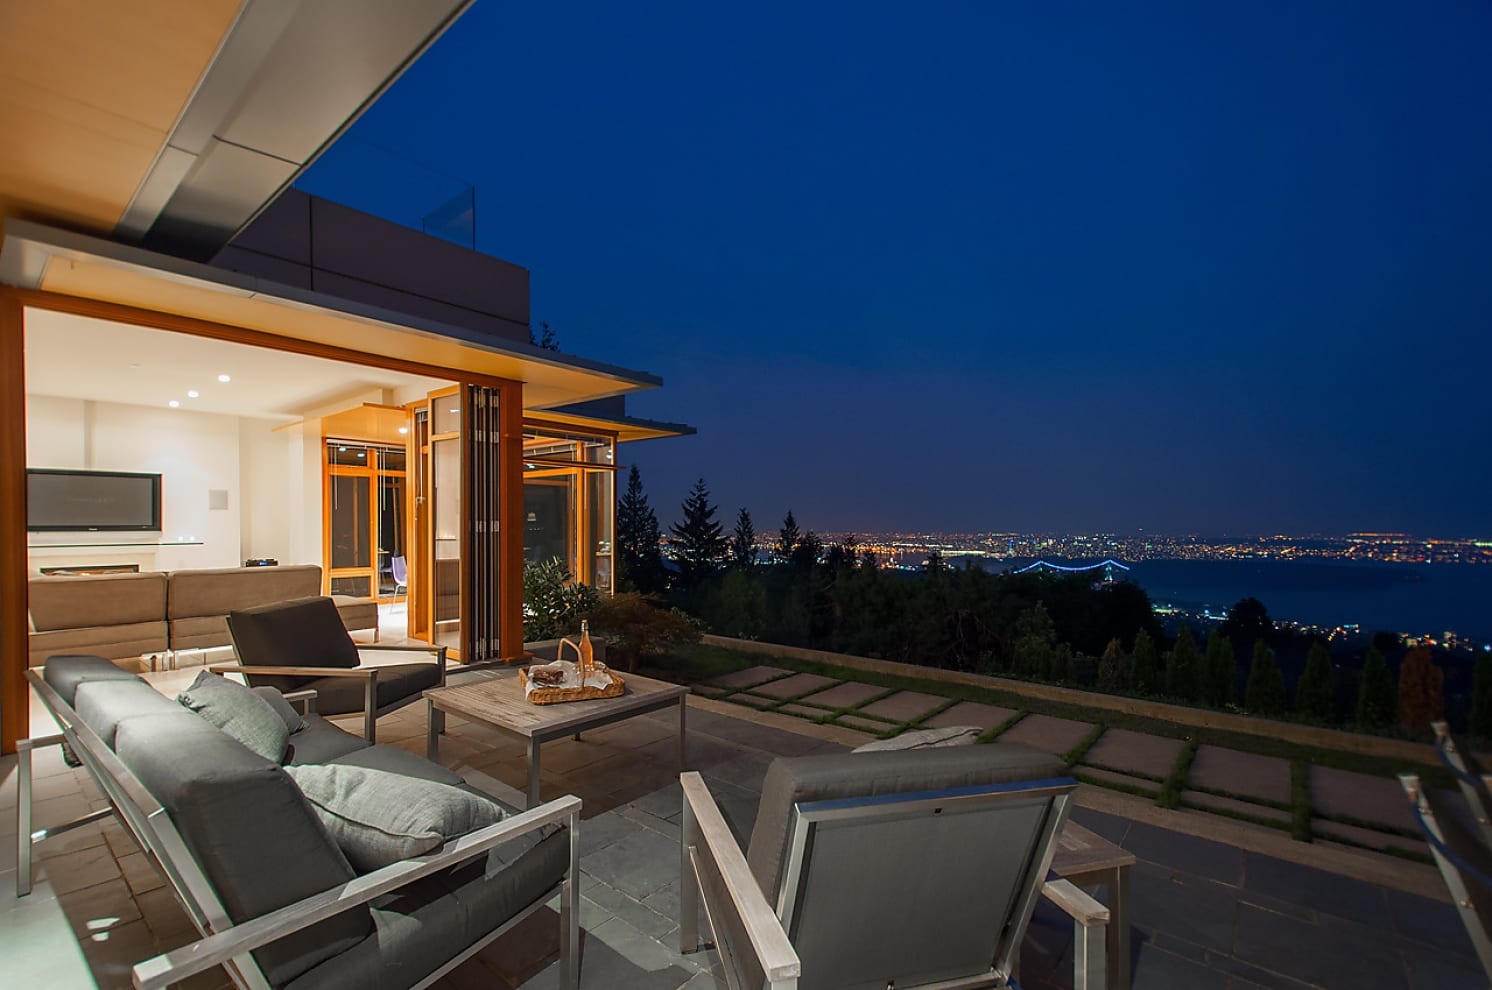 Wood bi-folds overlooking a view of Vancouver